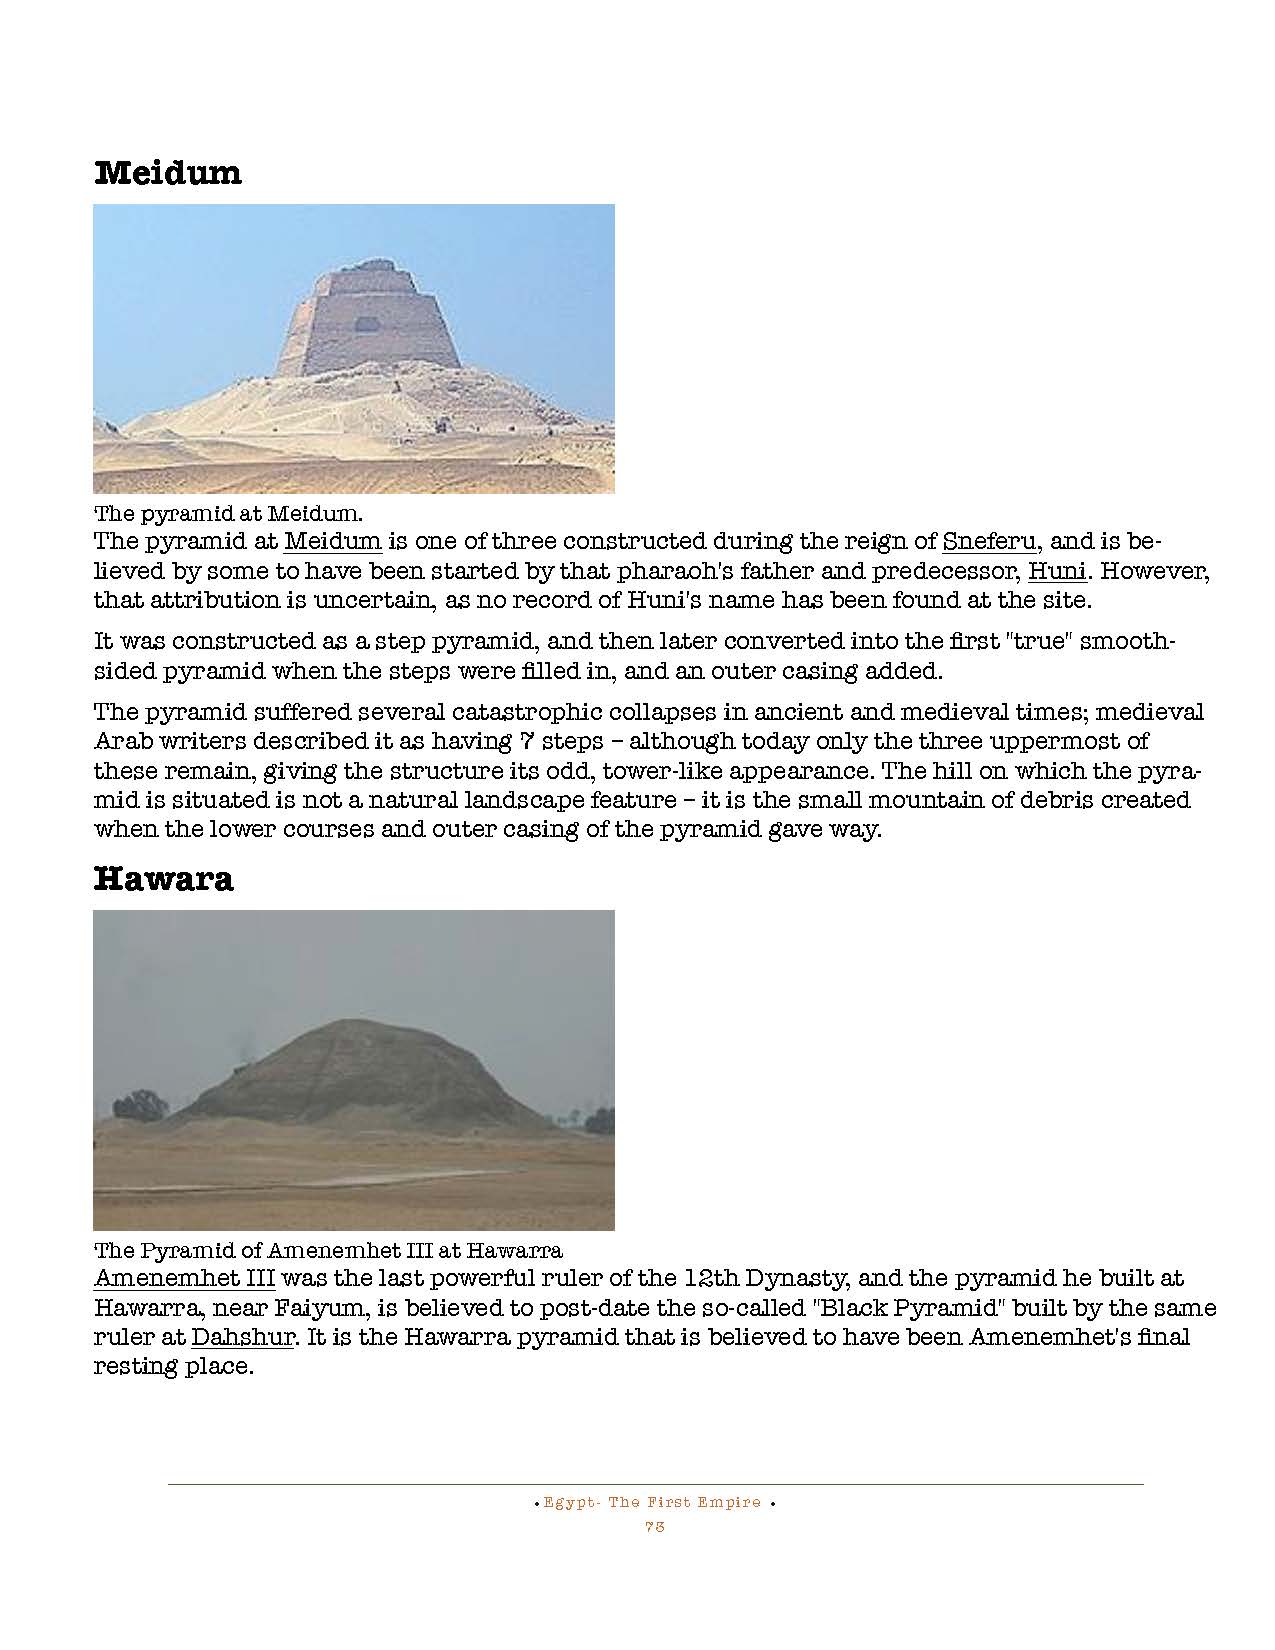 HOCE- Egypt  (First Empire) Notes_Page_073.jpg